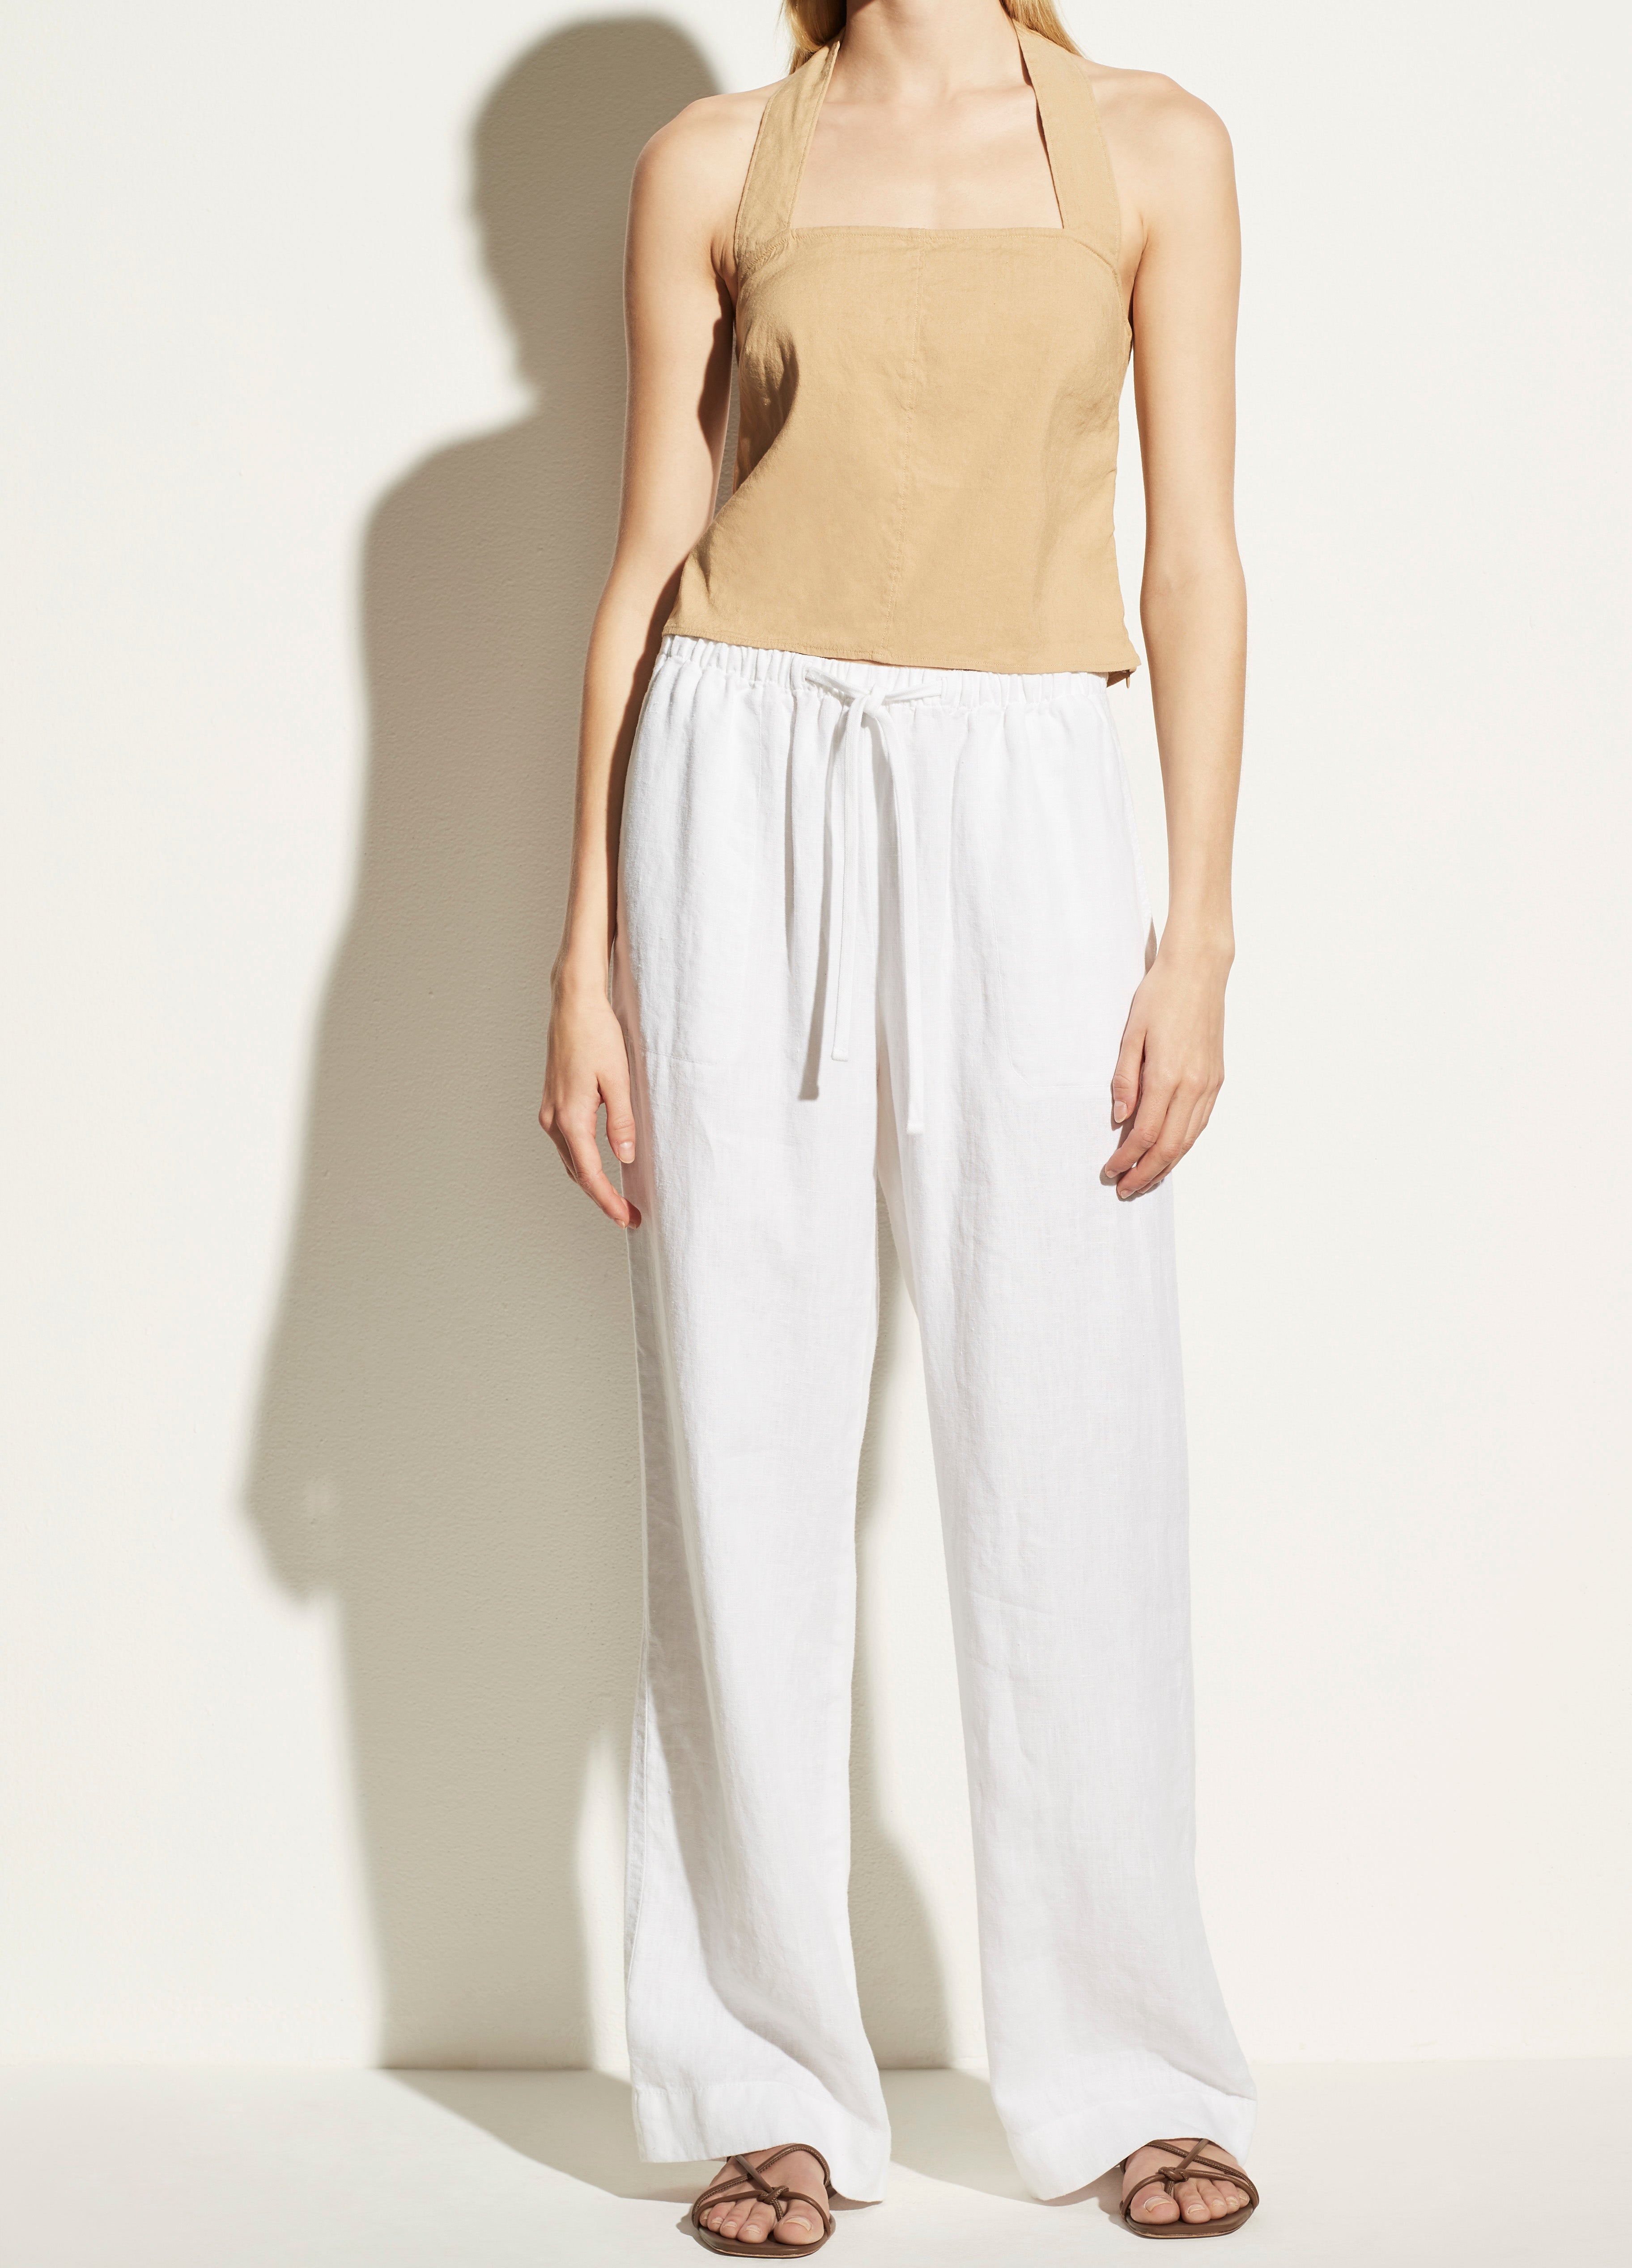 Vince | Tie Front Pull On Pant in Optic White | Vince Unfold